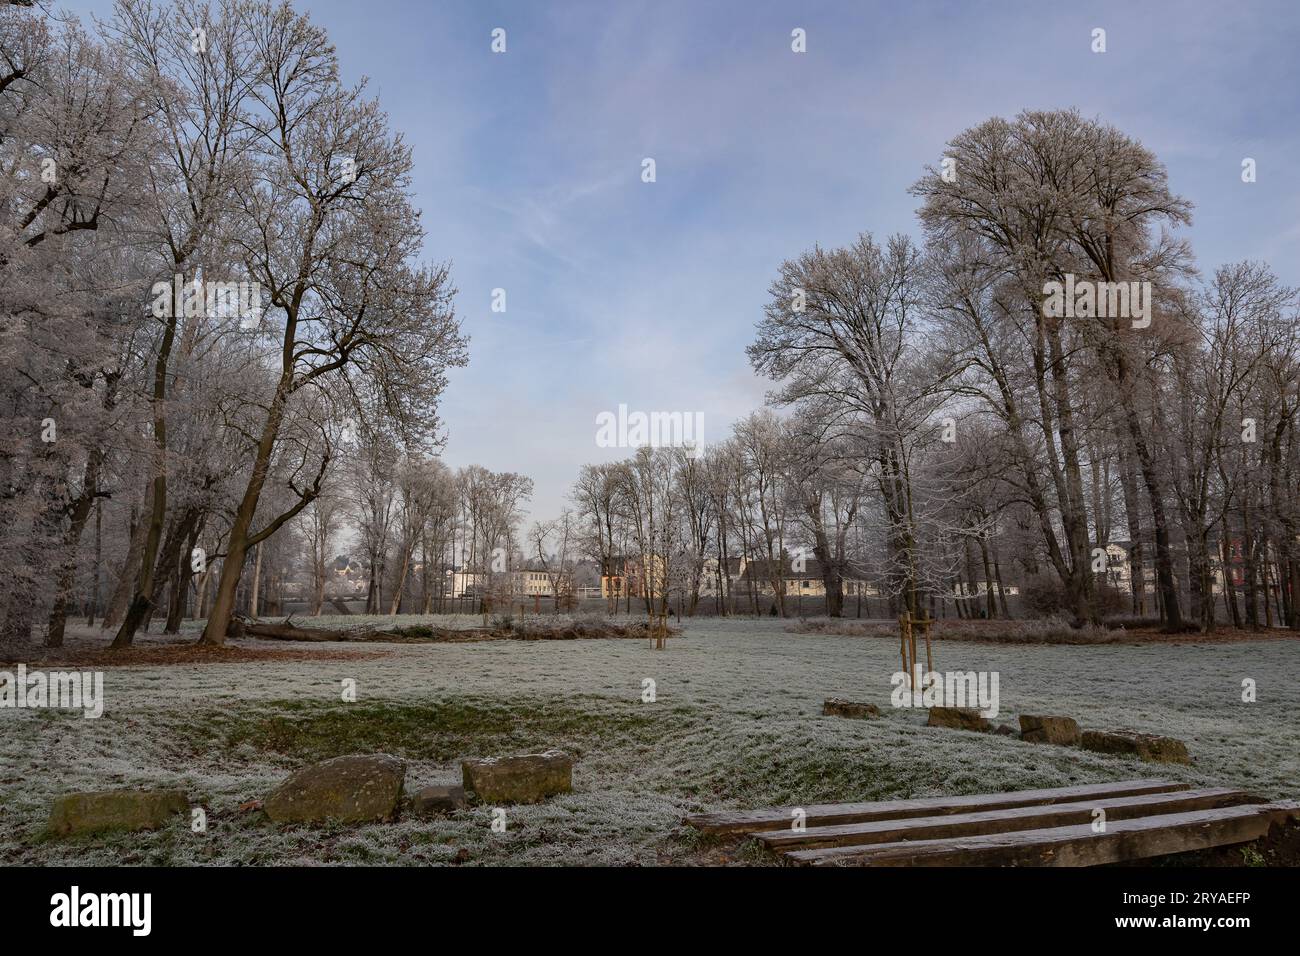 Hoar frost on trees and grass in a park on a clear winter day Stock Photo